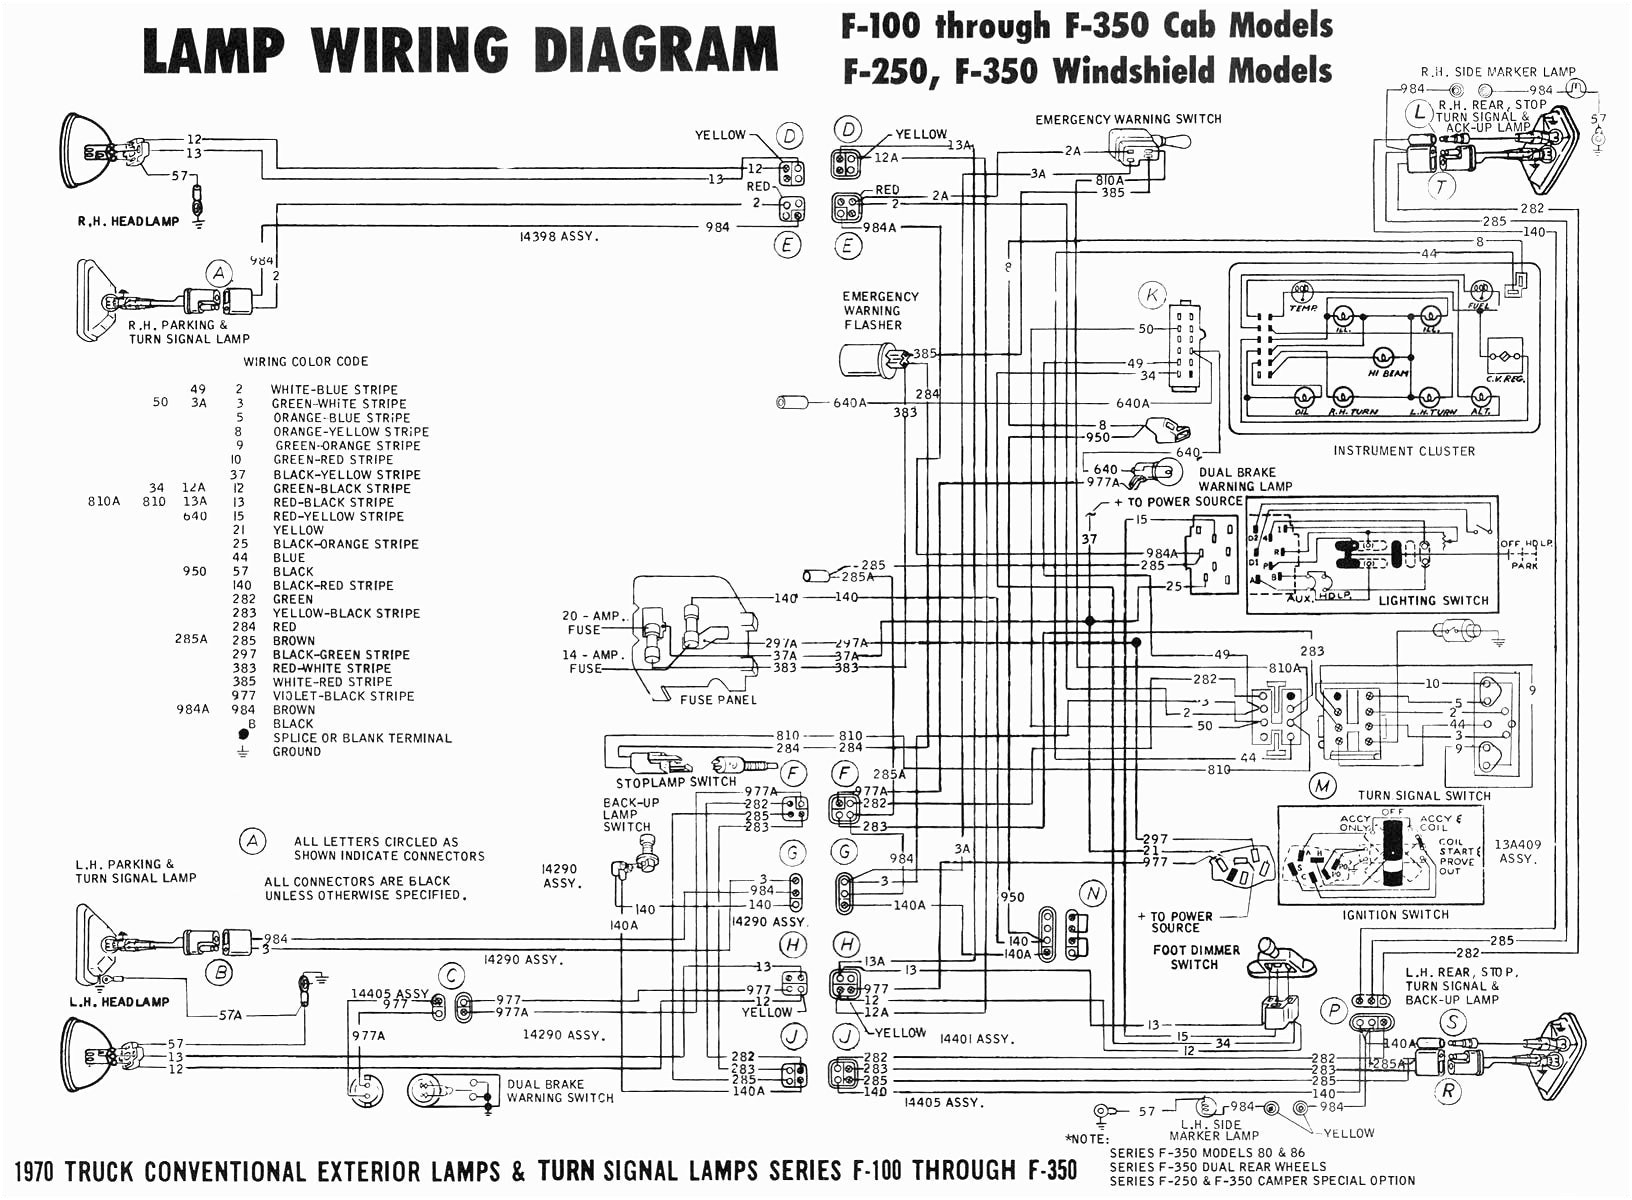 mtd ignition switch wiring diagram wiring diagram for mtd ignition switch fresh wiring diagram amplifier archives joescablecar fresh wiring 14q jpg